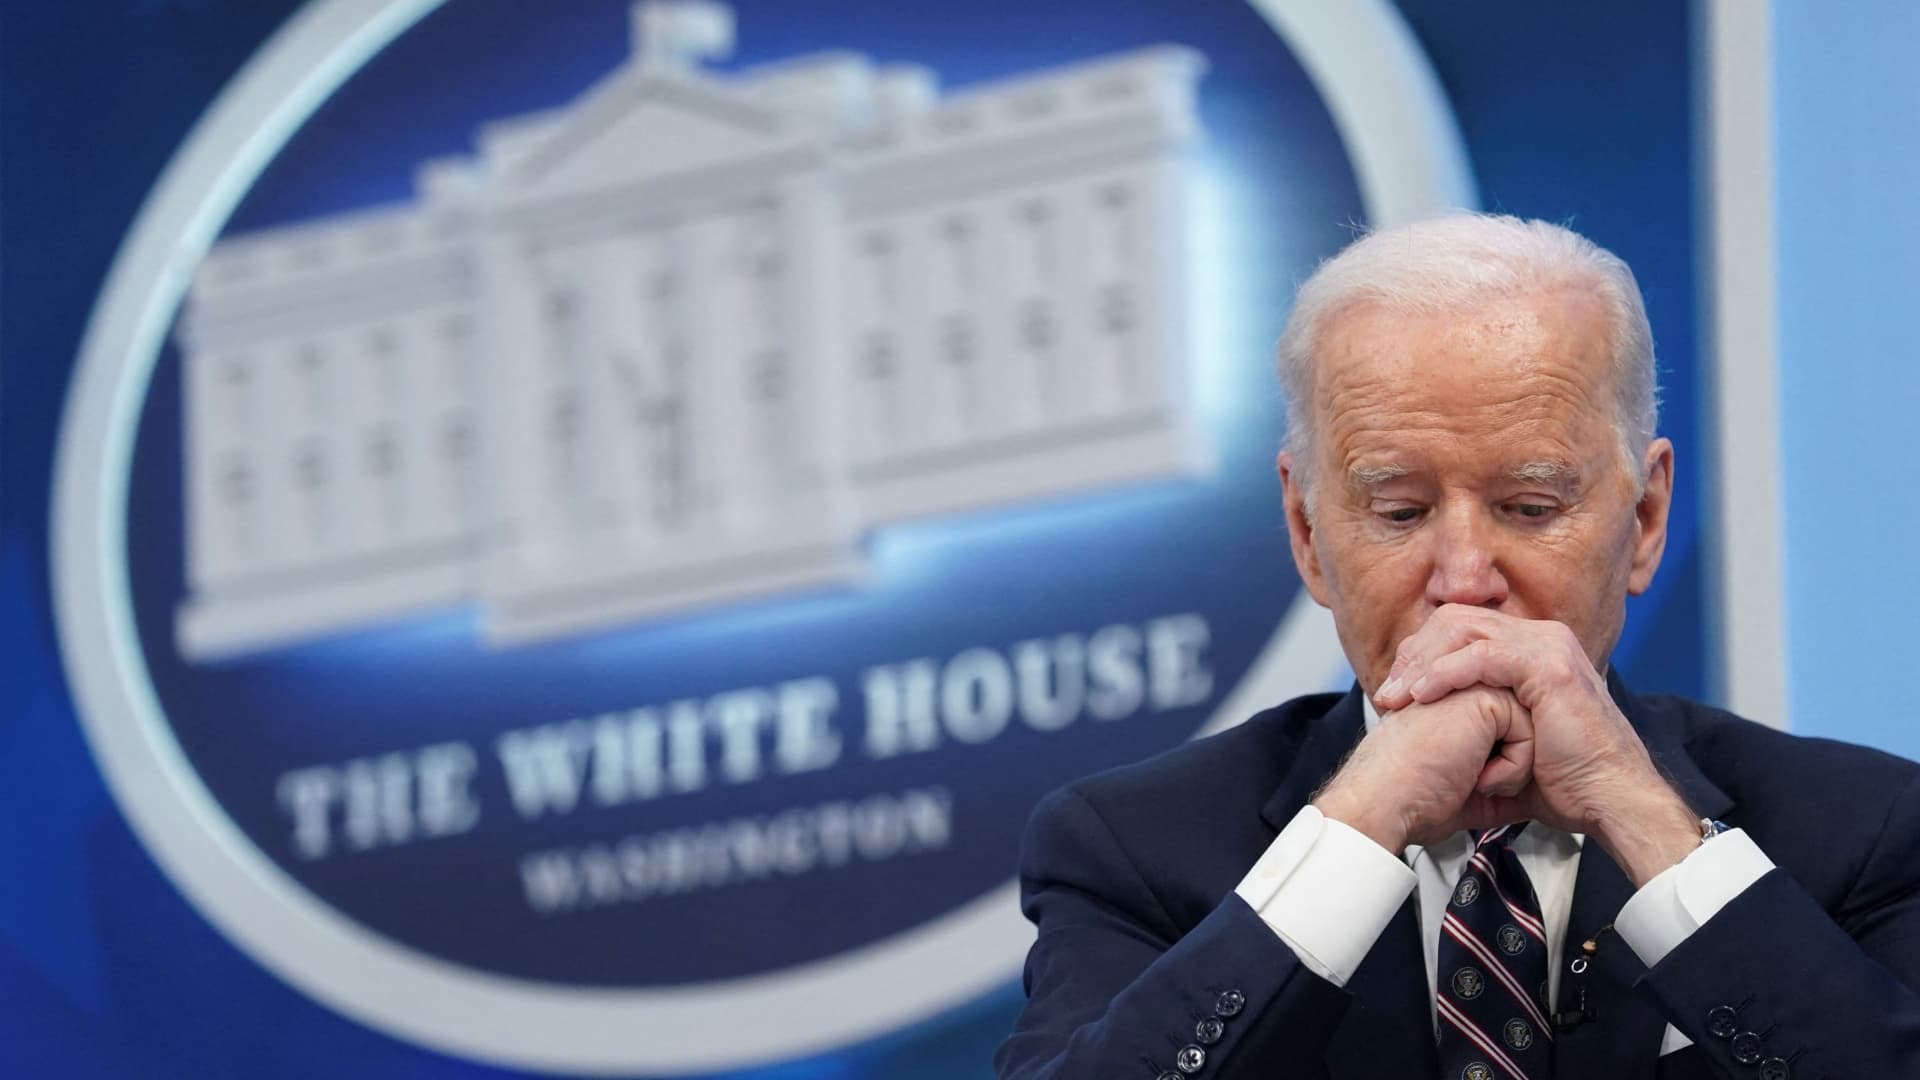 U.S. President Joe Biden looks down while hosting a virtual roundtable on securing critical minerals at the White House in Washington, February 22, 2022.